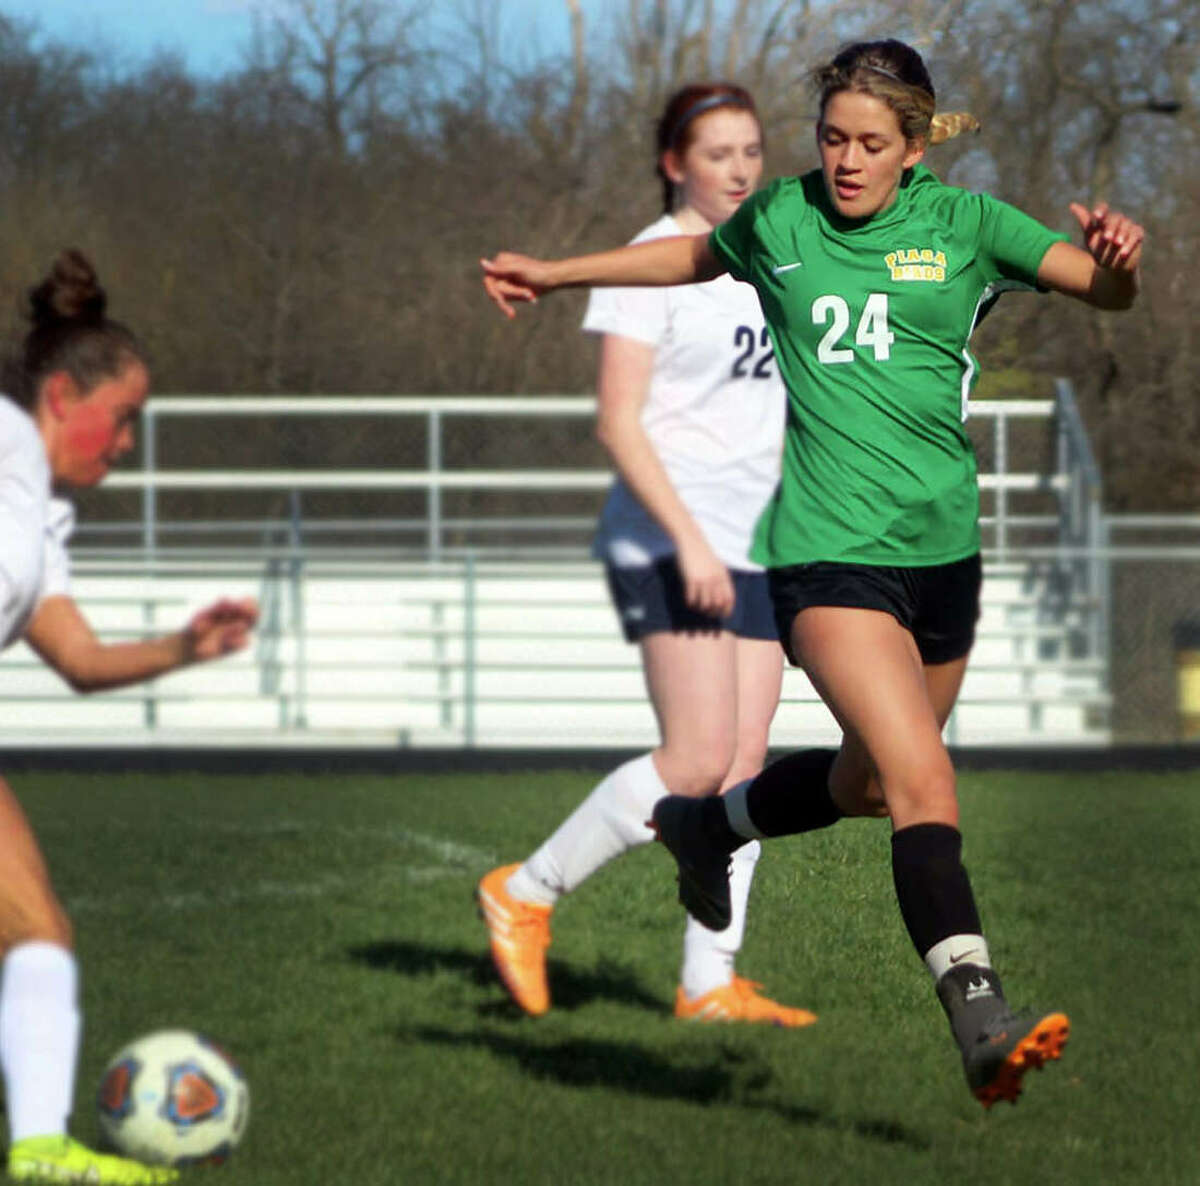 Mac Day of Southwestern scored 20 goals and added 19 assists last season for the Piasa Birds. Day and the Piasa Birds open the season Saturday at Wesclin.